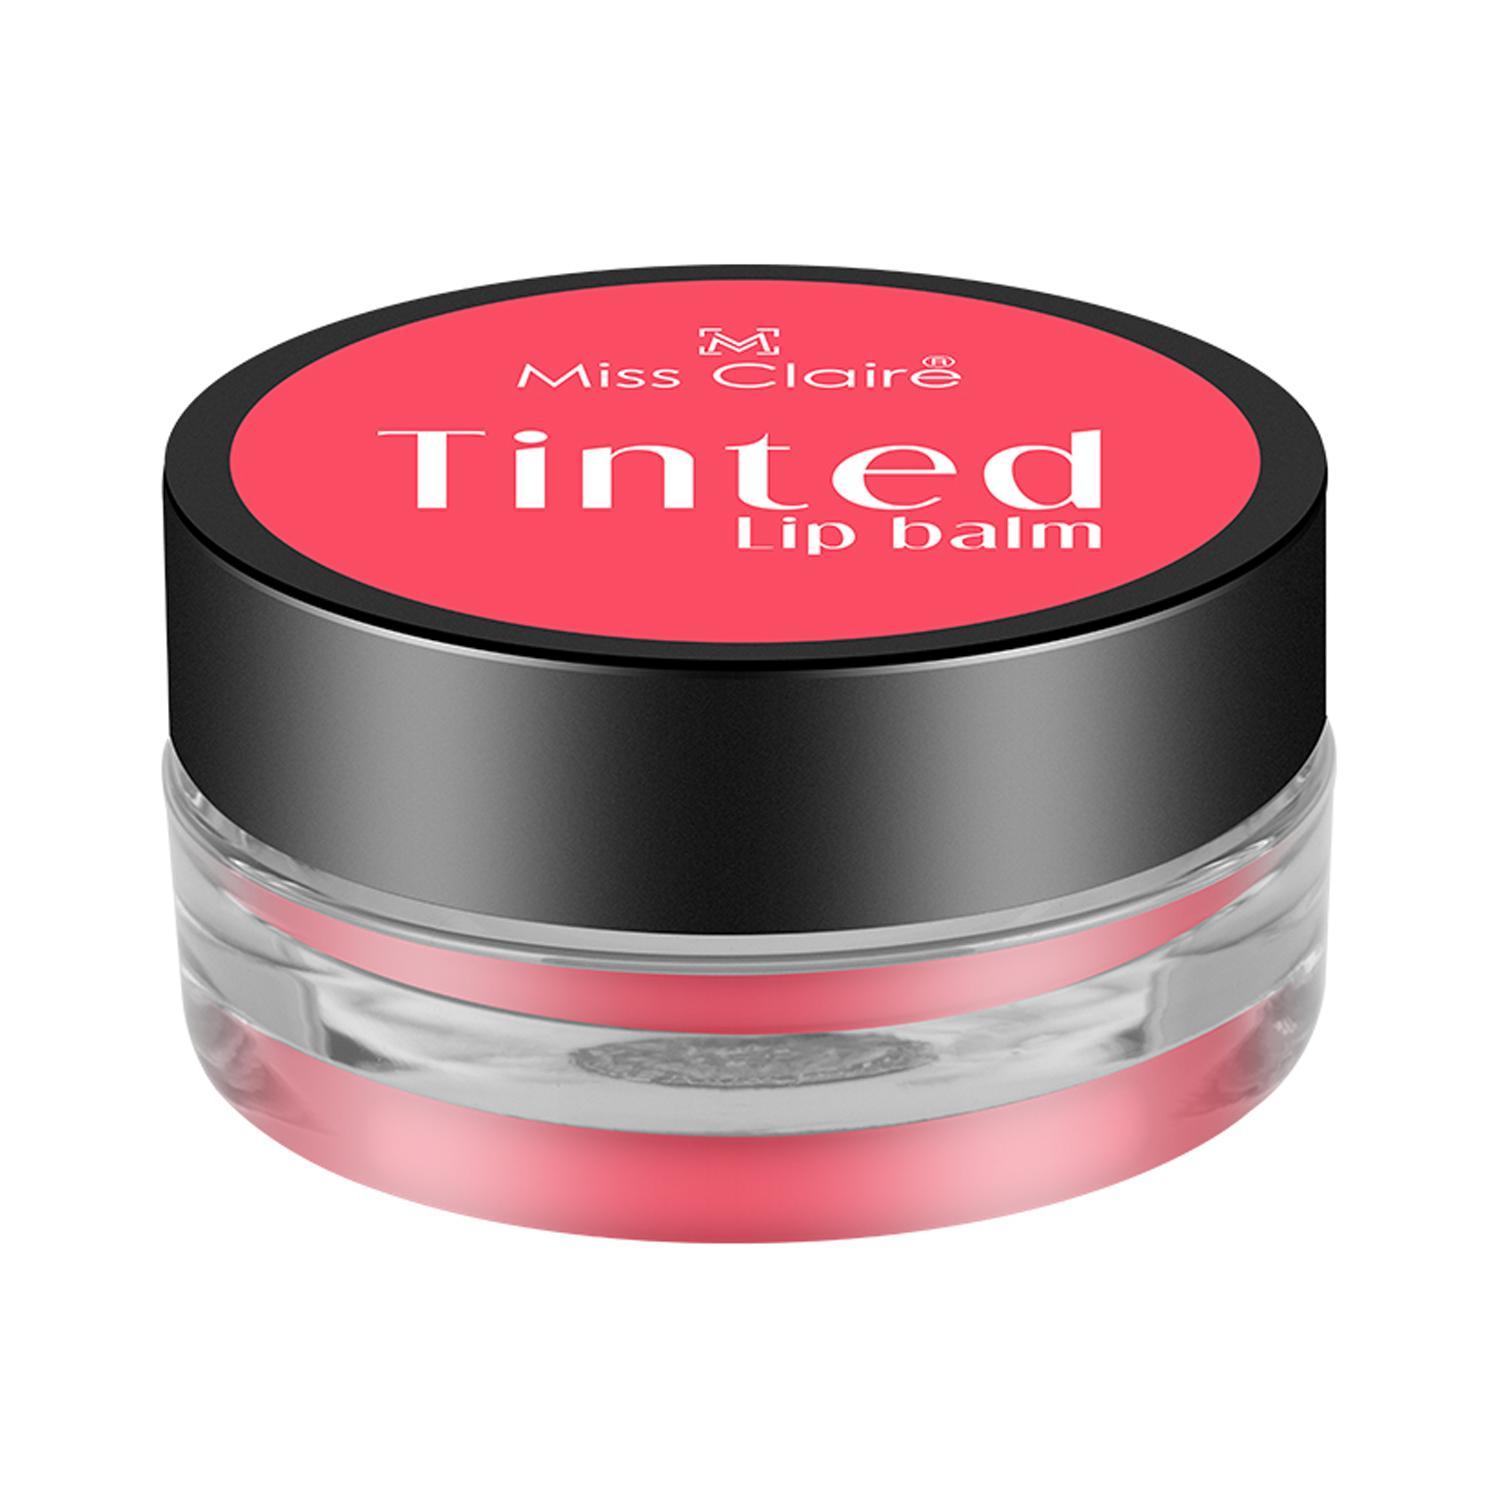 miss claire tinted lip balm - 01 pink (3g)